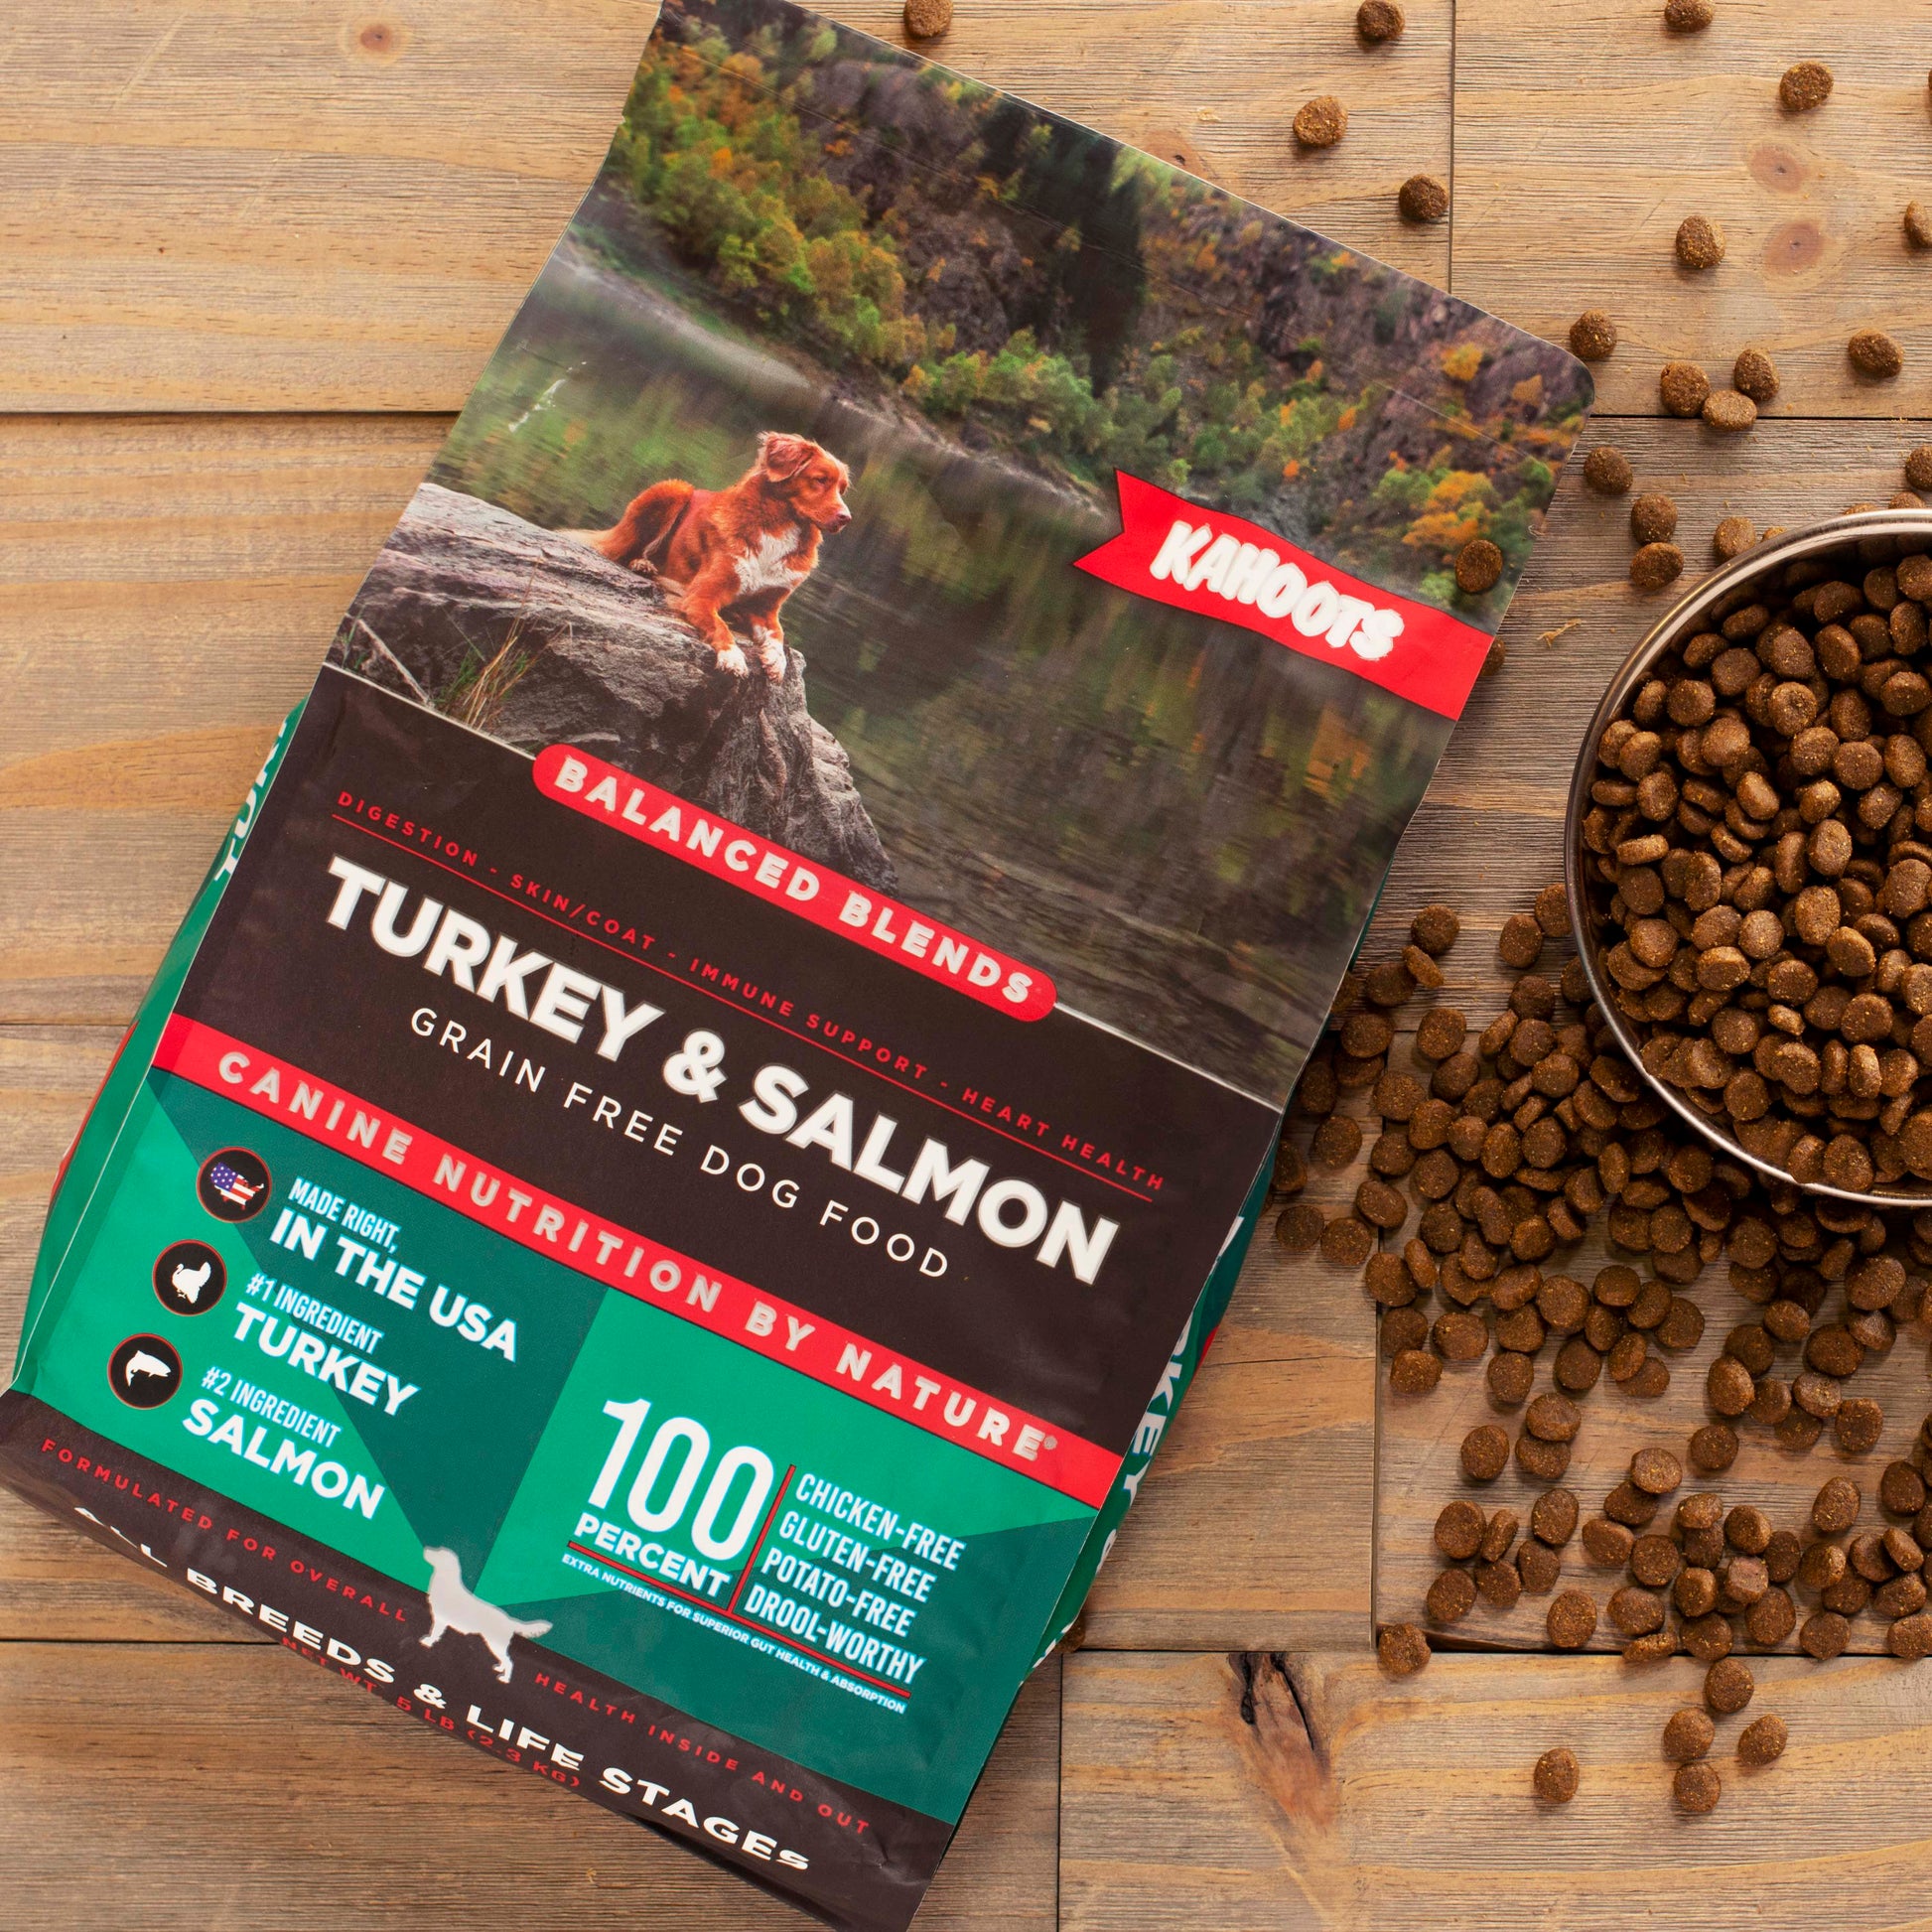 Turkey and salmon dog food over wood background